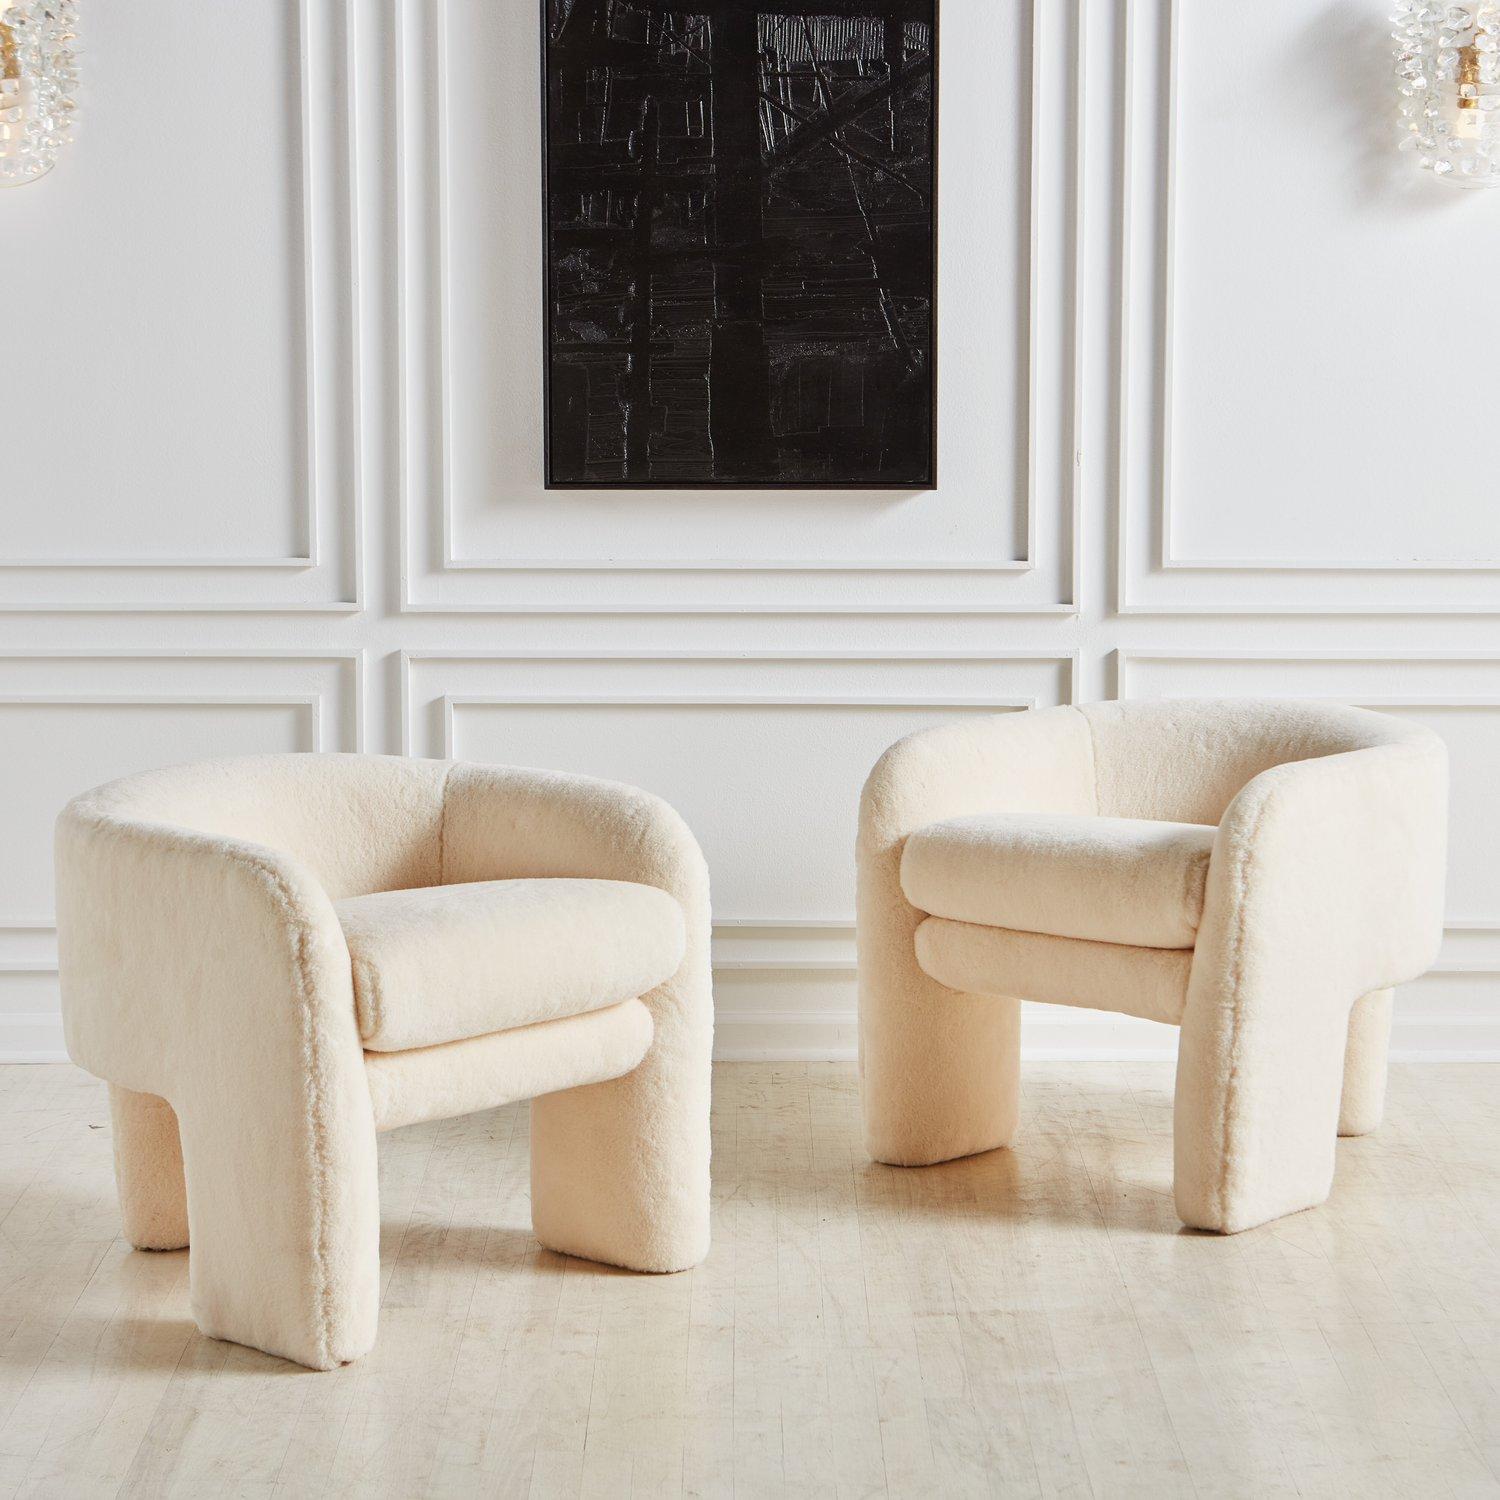 A pair of sculptural lounge chairs attributed to Vladimir Kagan for Preview Furniture. These stunning three-legged chairs feature elegant curvature and make the most of negative space, offering a remarkable perspective from every angle. Freshly